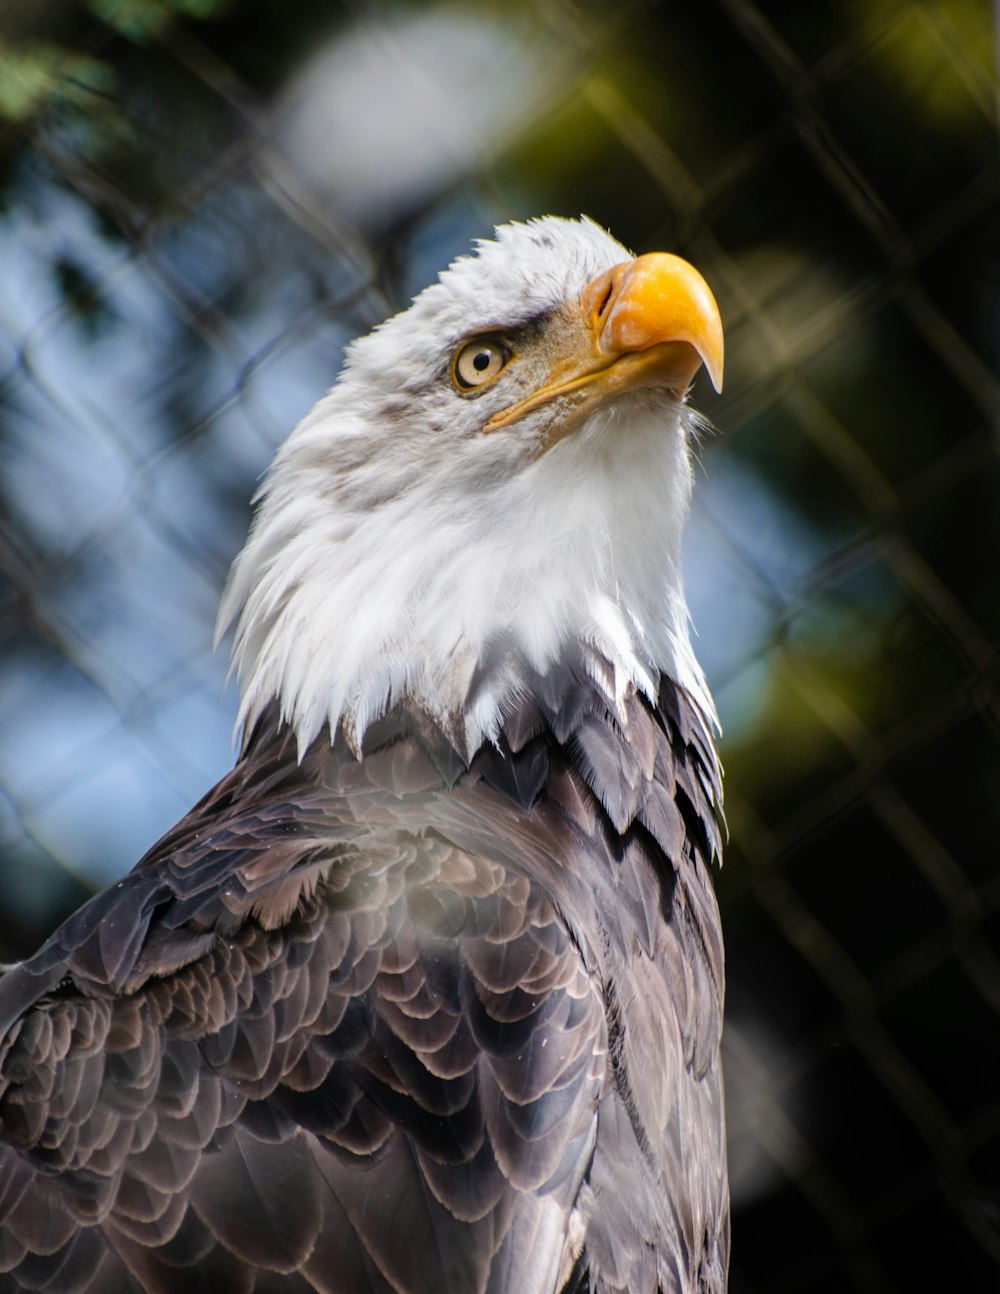 a close up of a bald eagle on a chain link fence